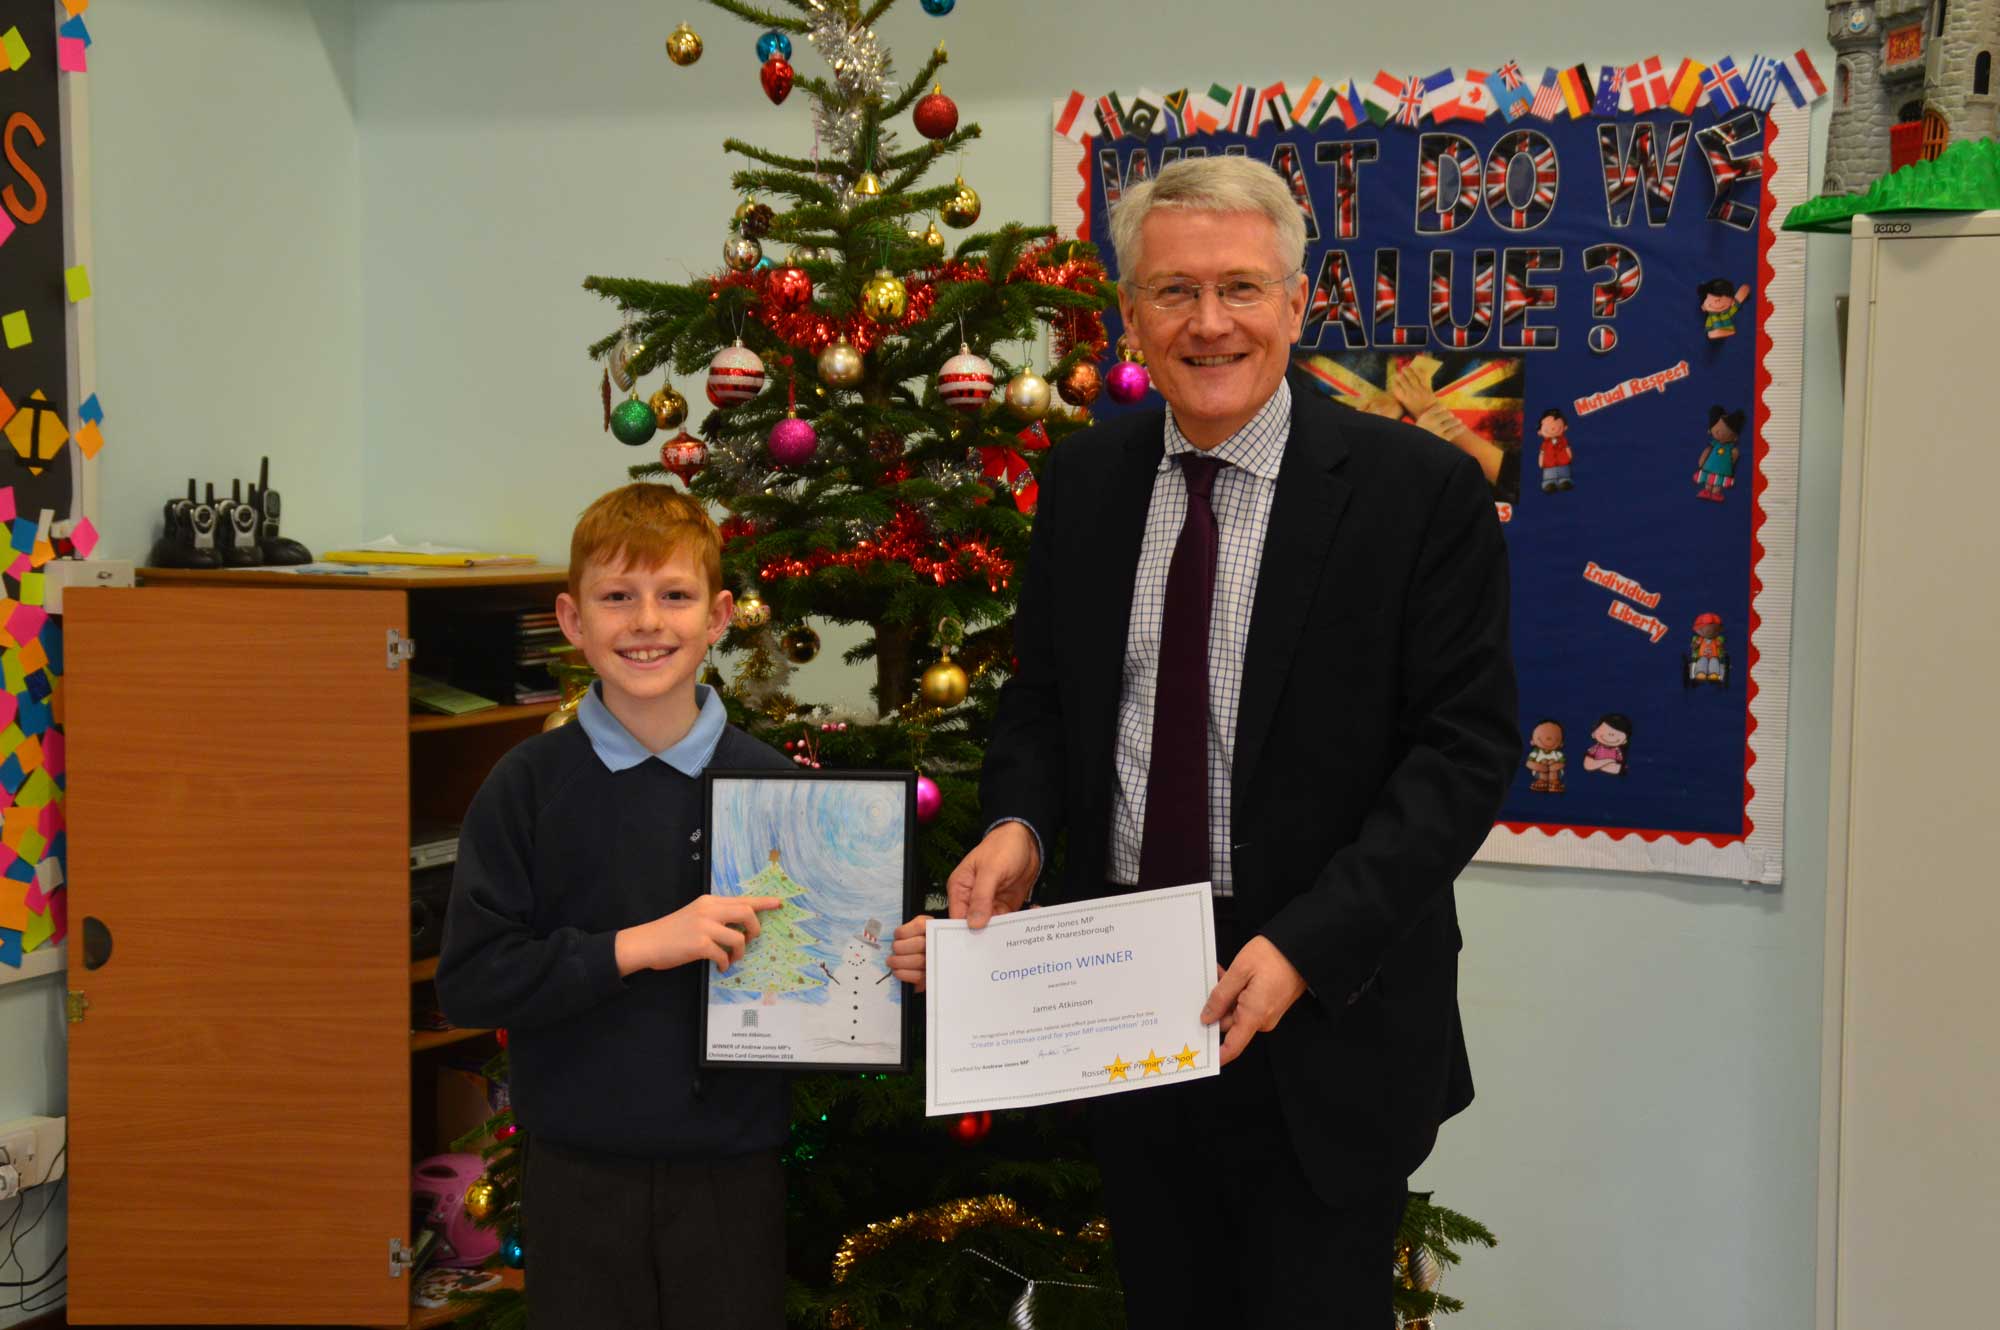 Harrogate and Knaresborough MP, Andrew Jones, will be using a design created by James Atkinson – a pupil at Rossett Acre Primary School in Harrogate – for his Christmas e-card